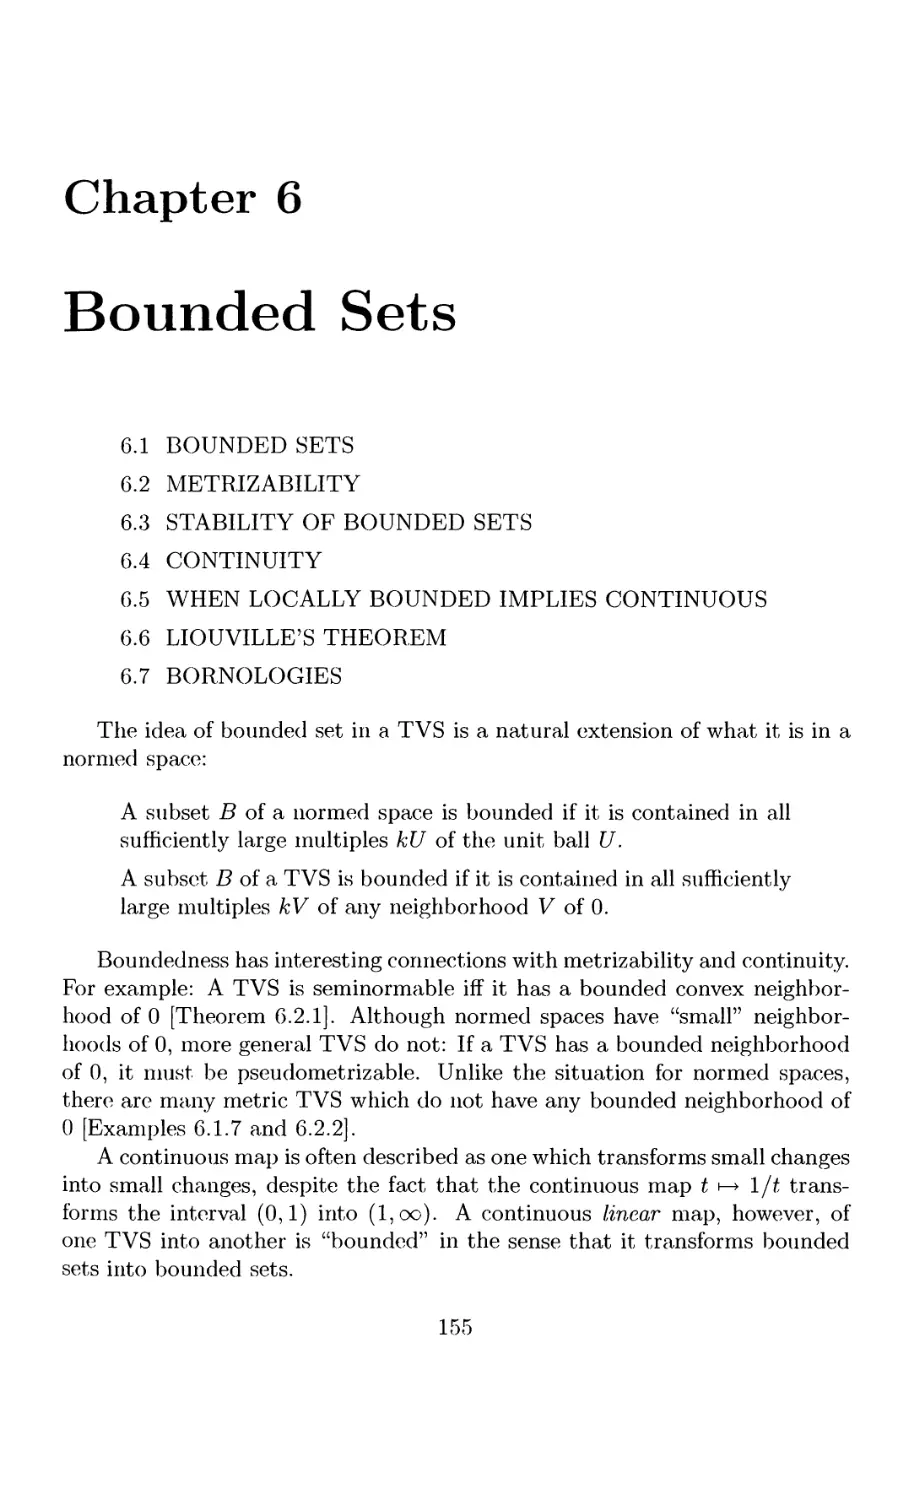 6 Bounded Sets